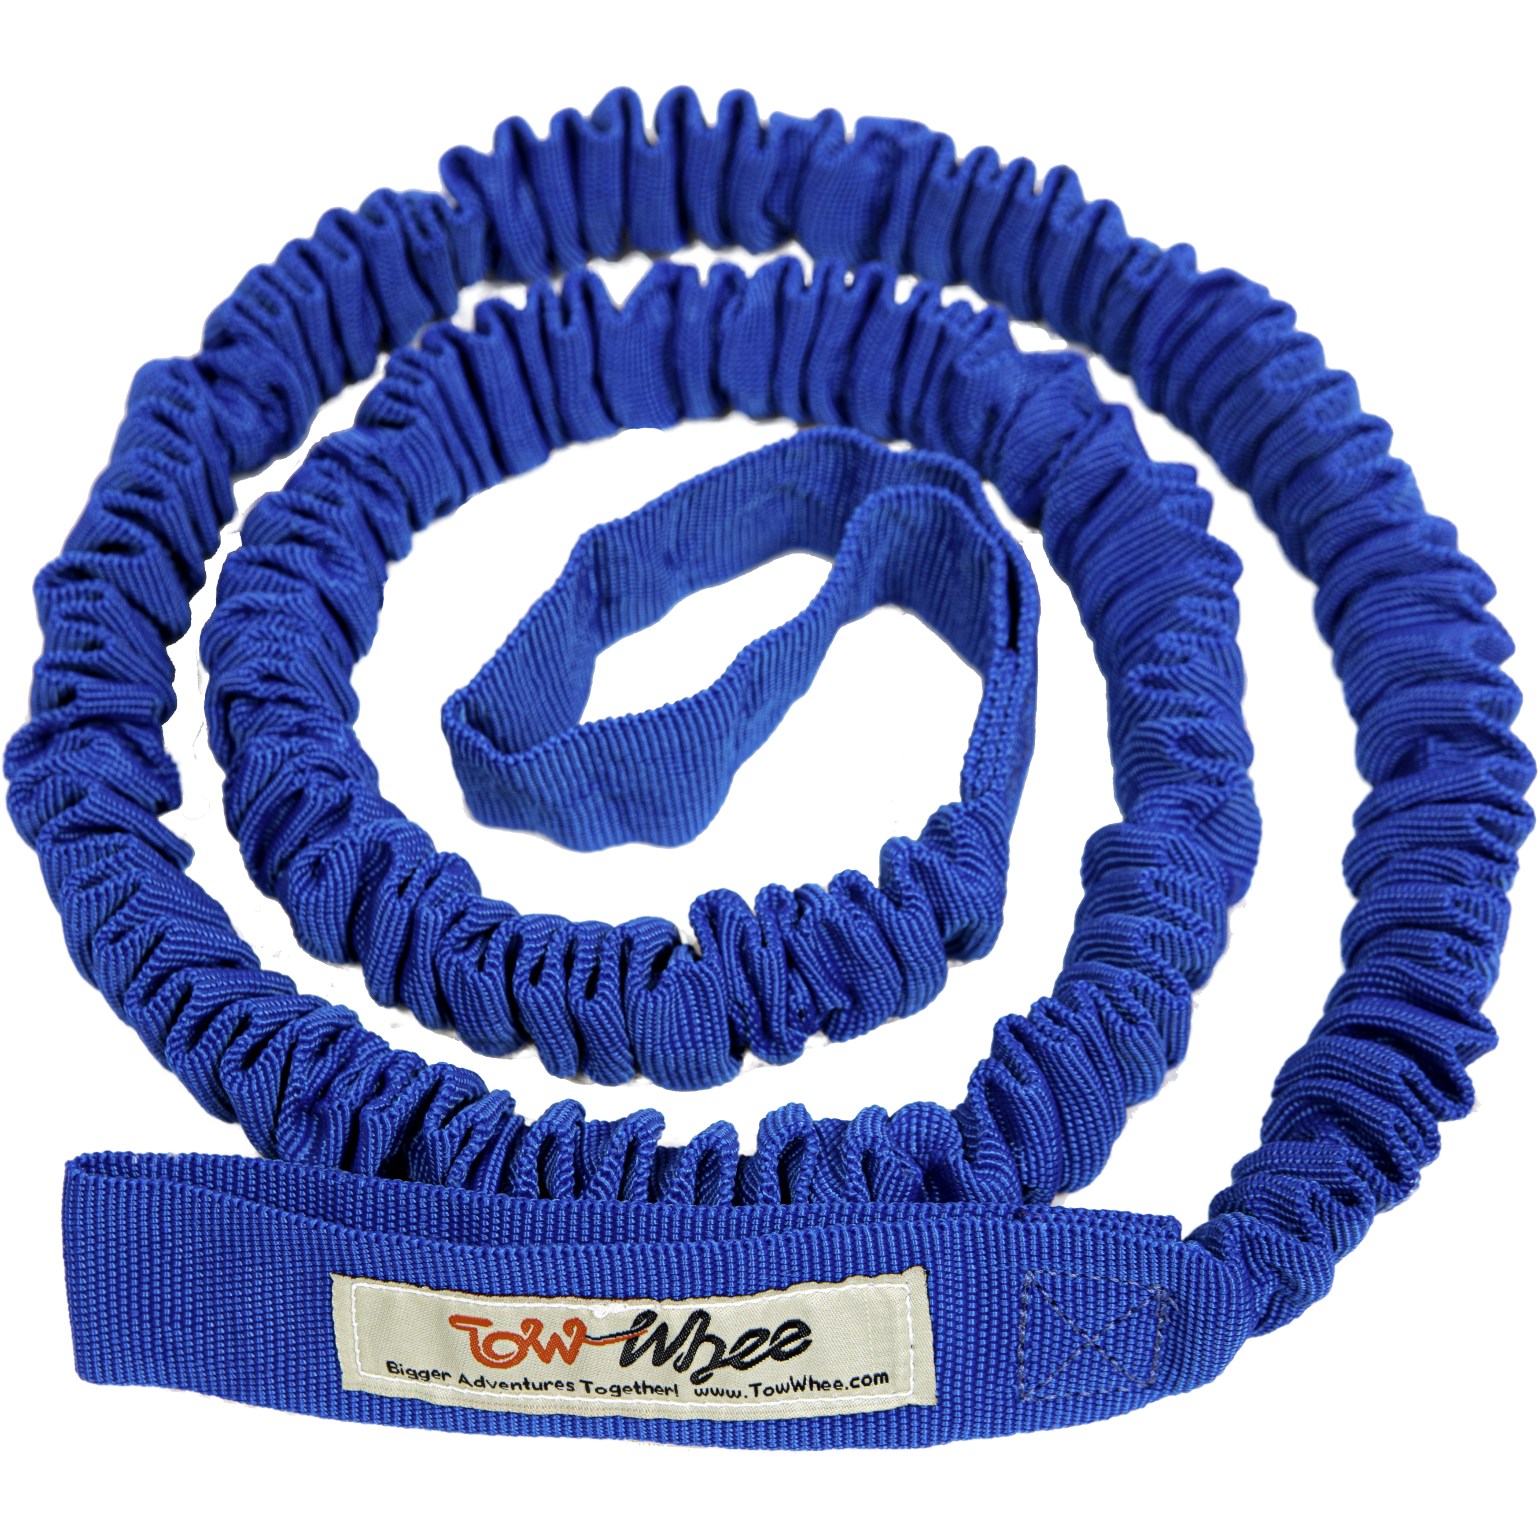 Picture of TowWhee Winter / 4 Seasons Bicycle Tow Rope - blue